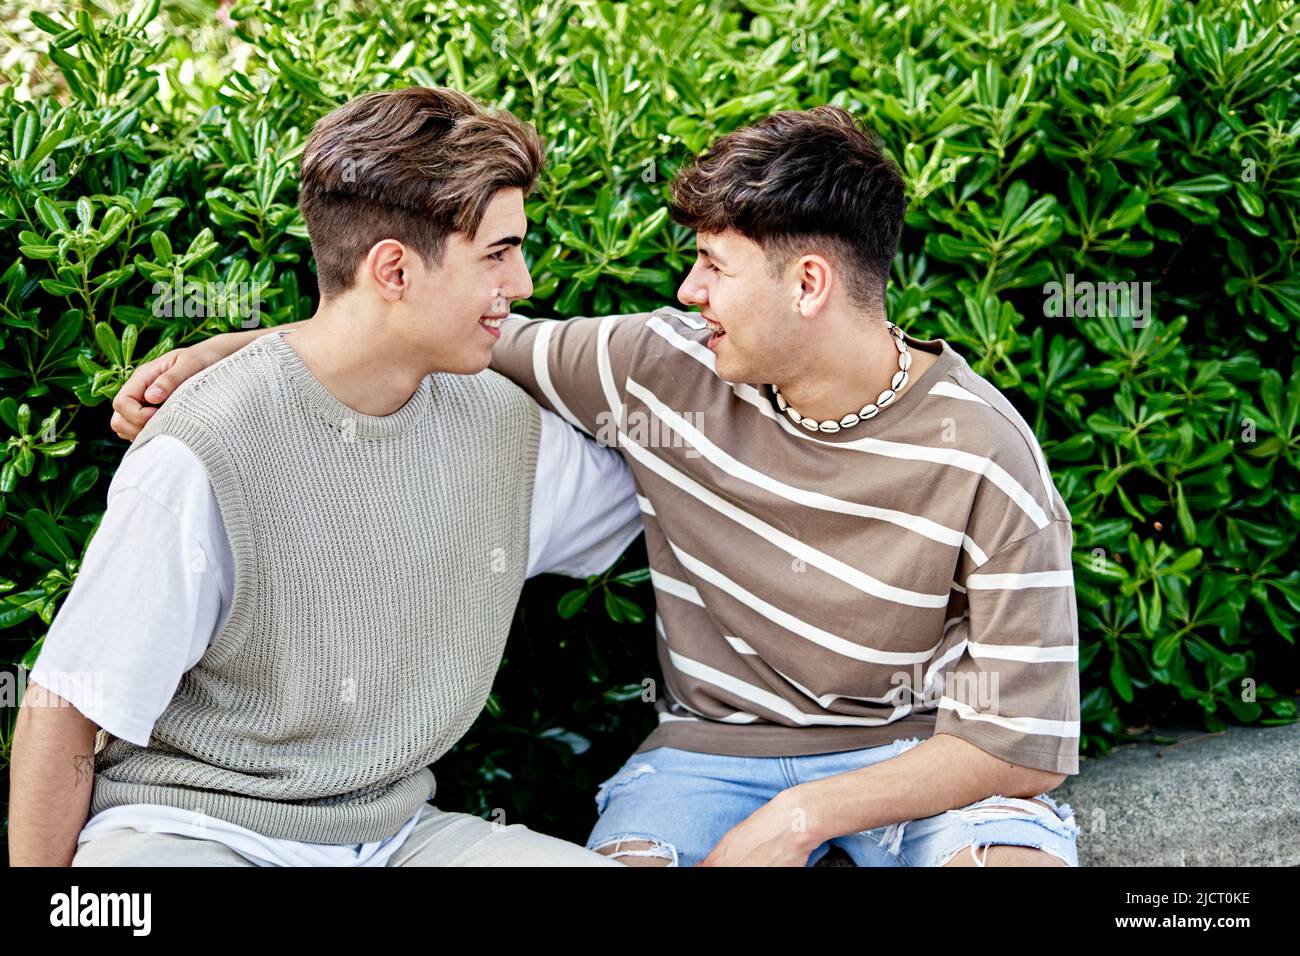 Moment Of Intimacy Of A Gay Couple Stock Photo